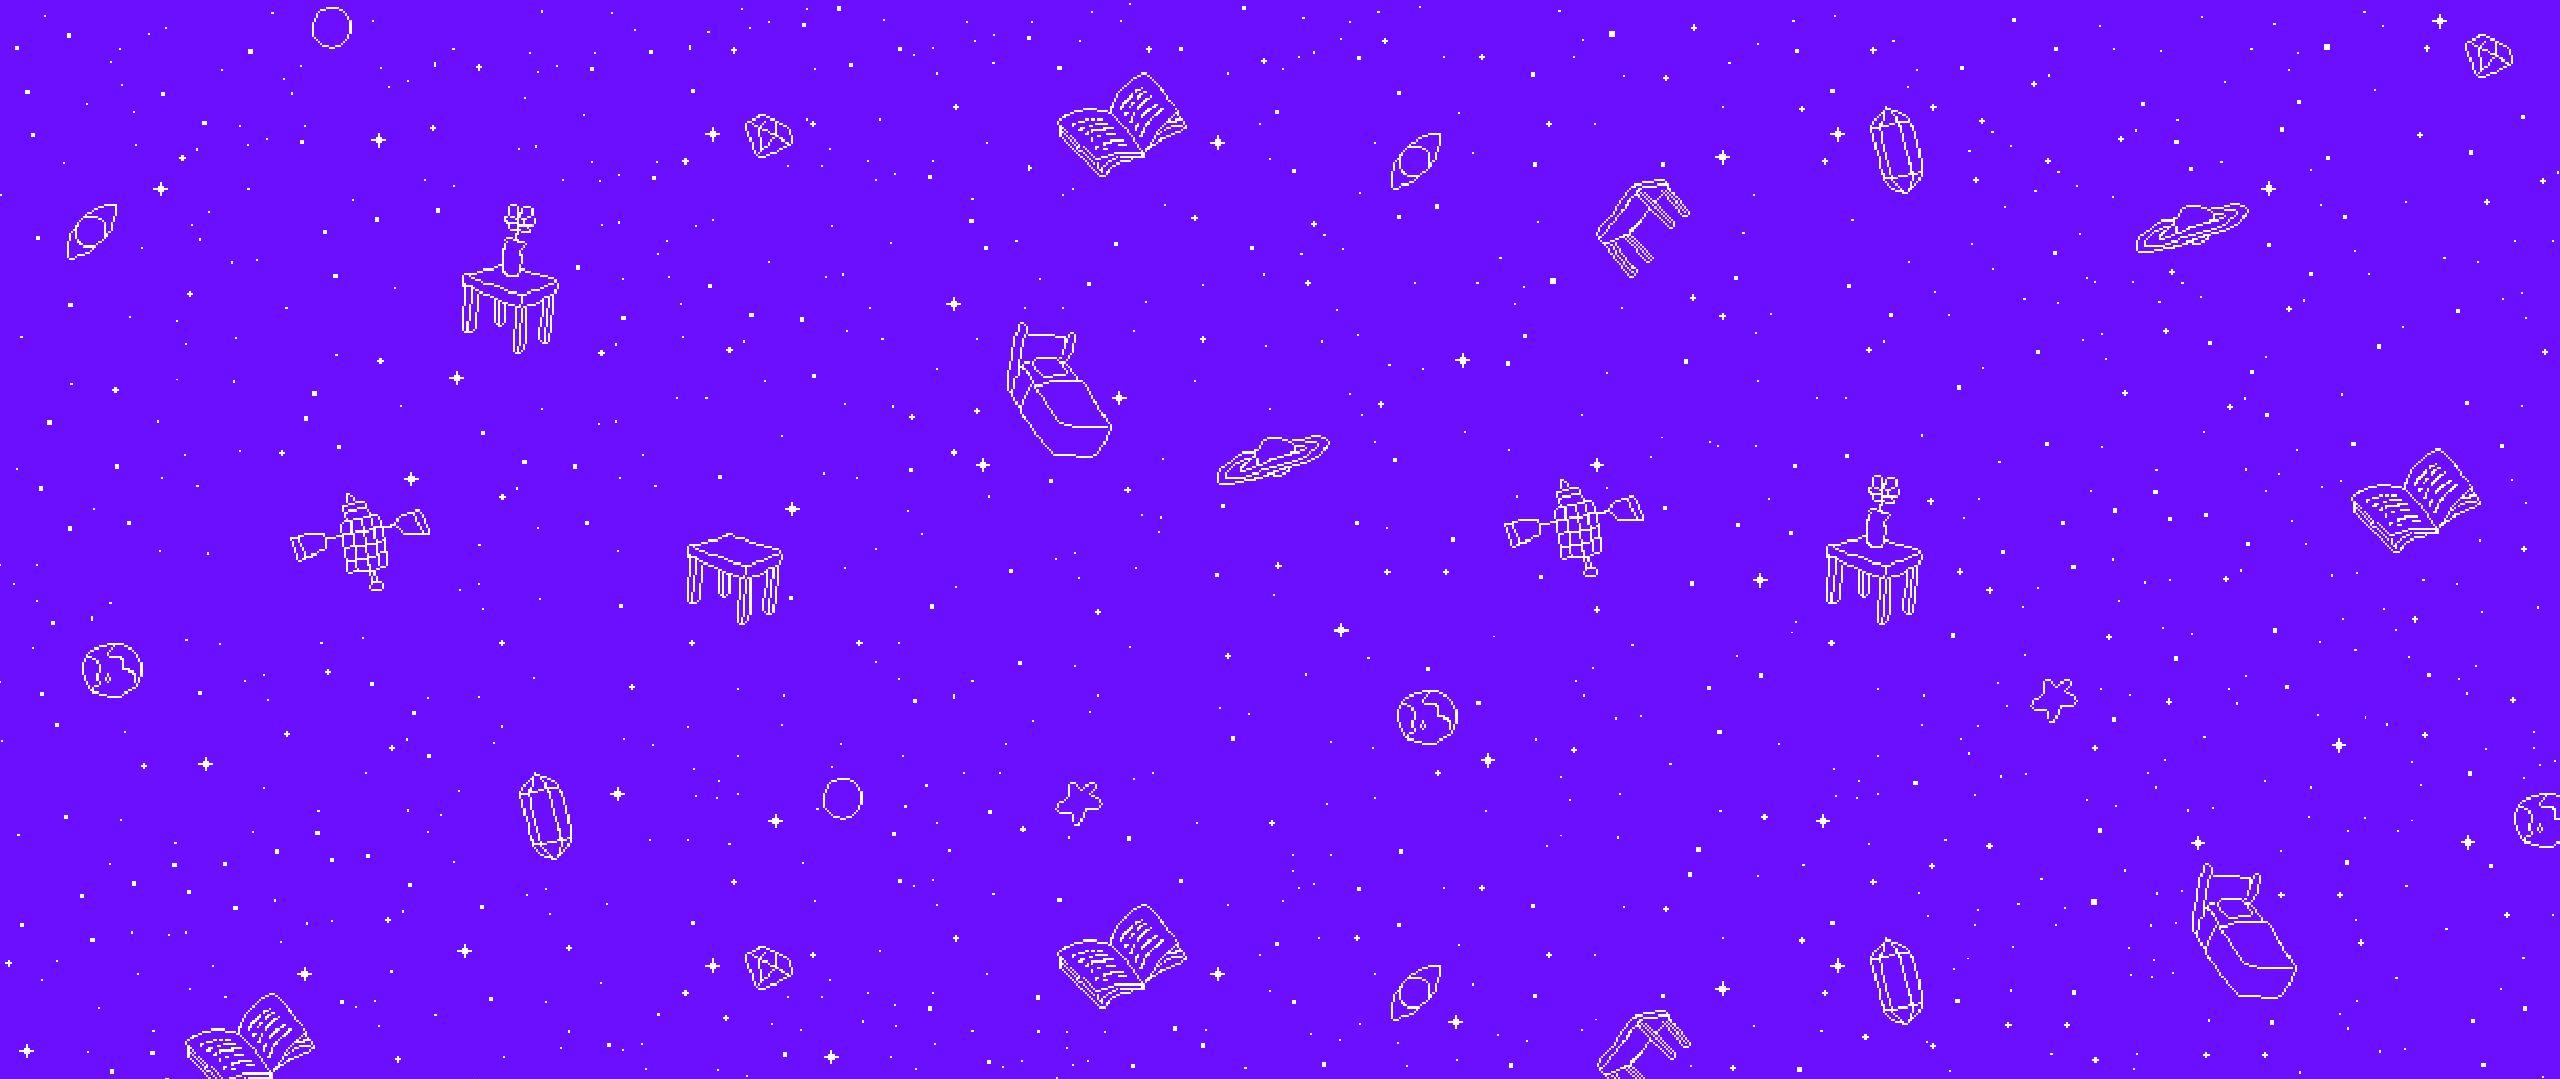 Omori Wallpaper For Desktop Pictures And